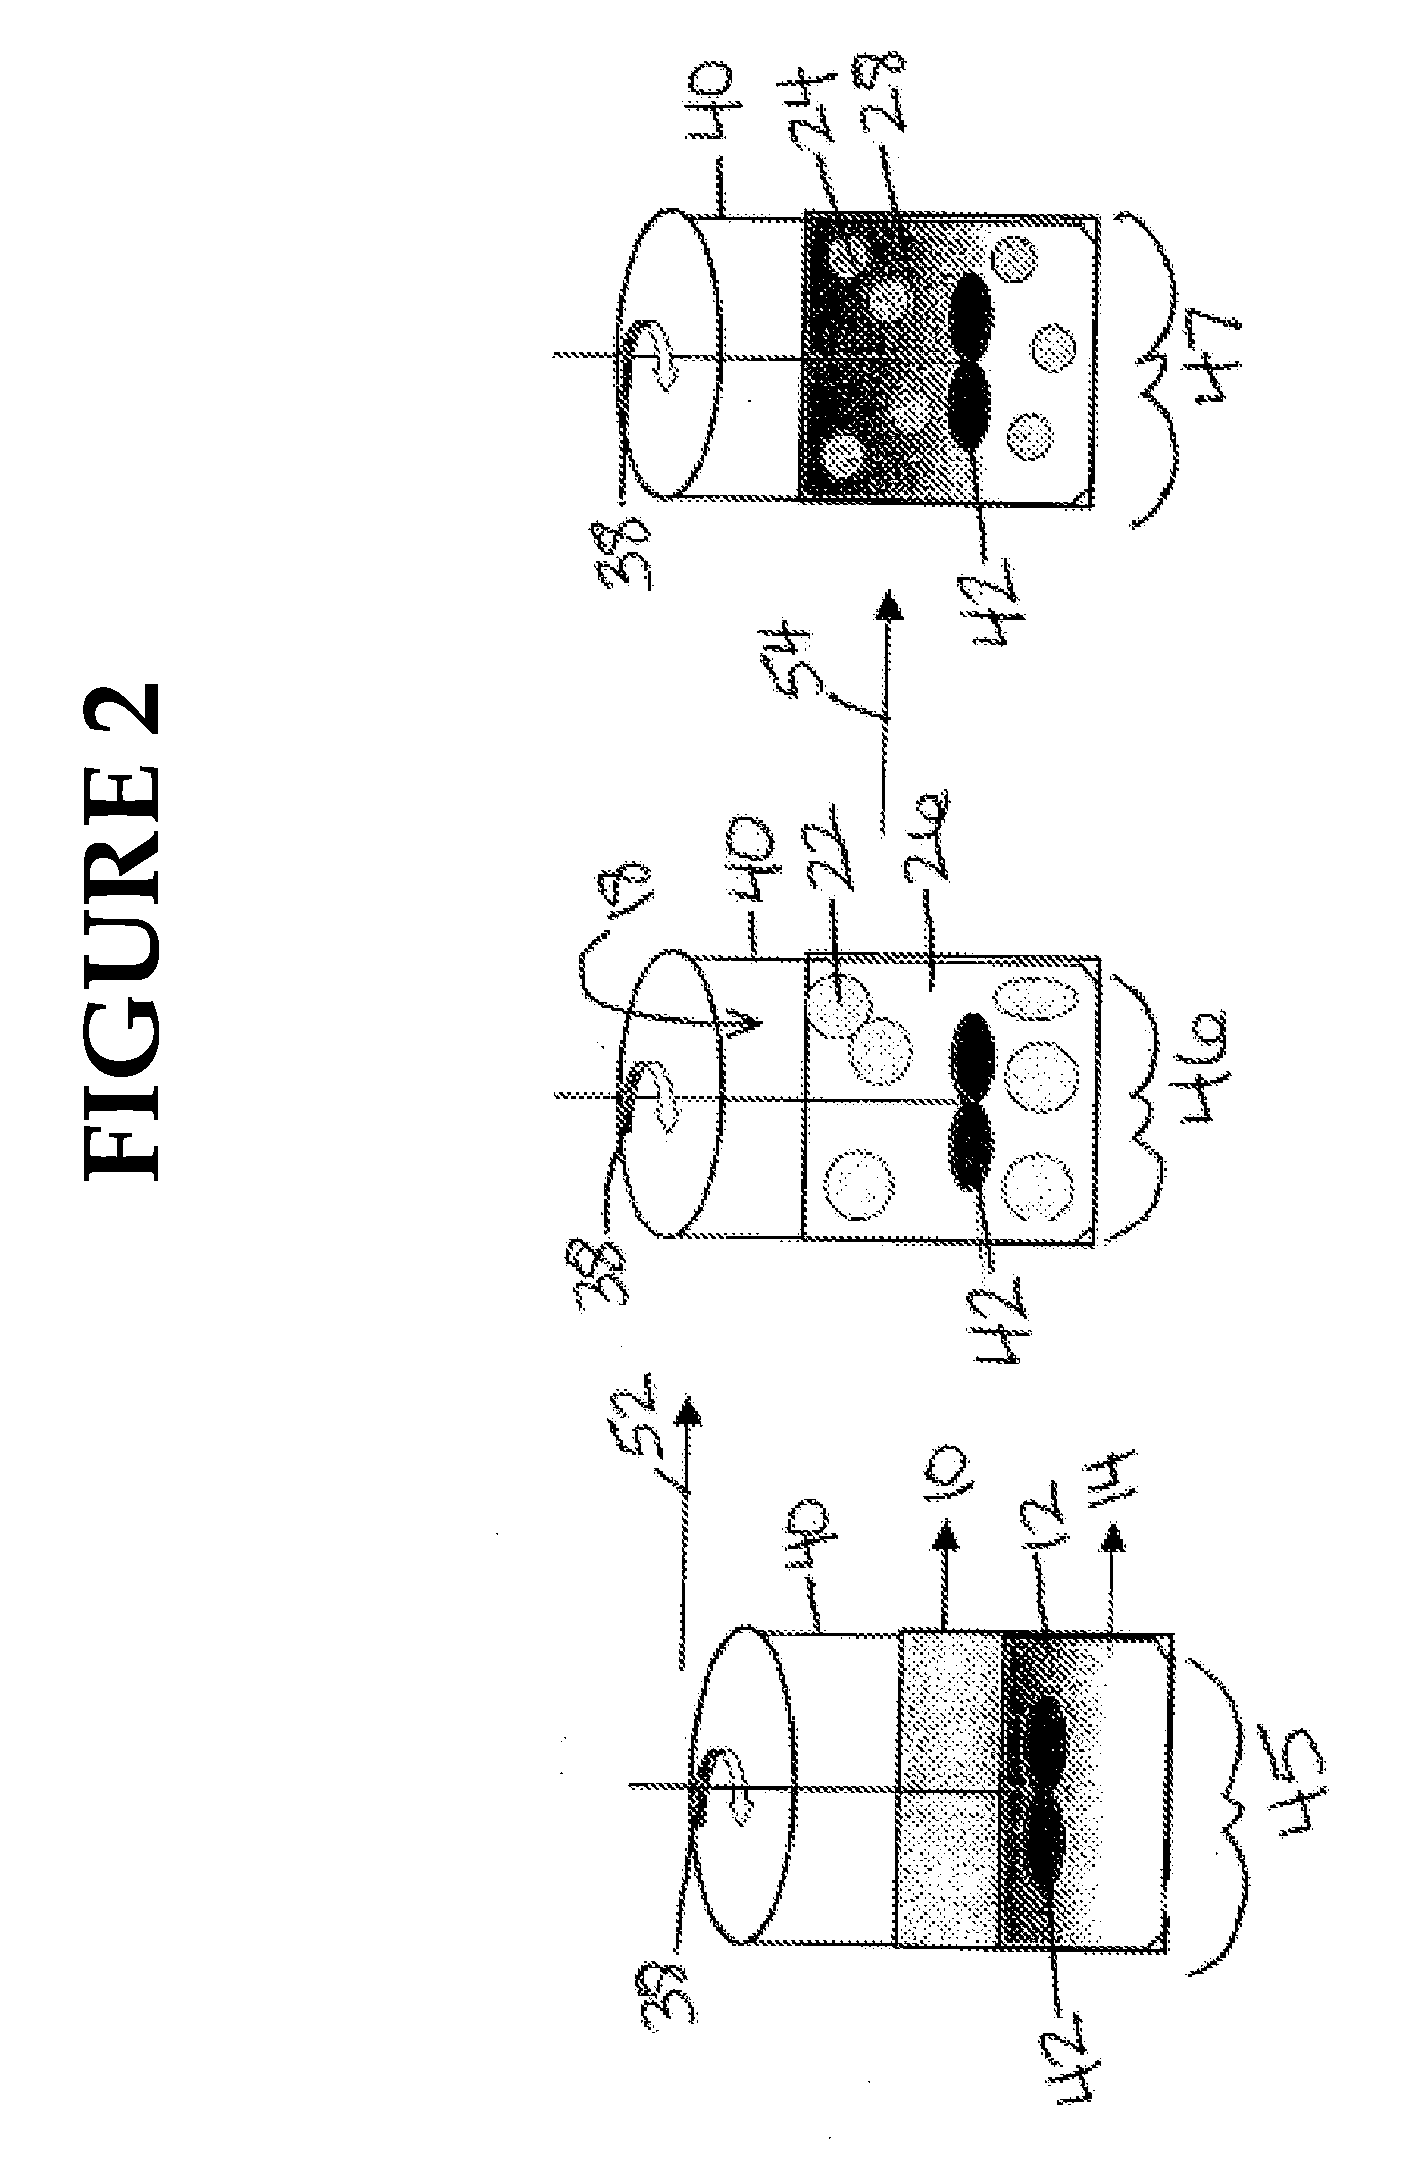 Process for preparing thermally stable oil-in-water and water-in-oil emulsions